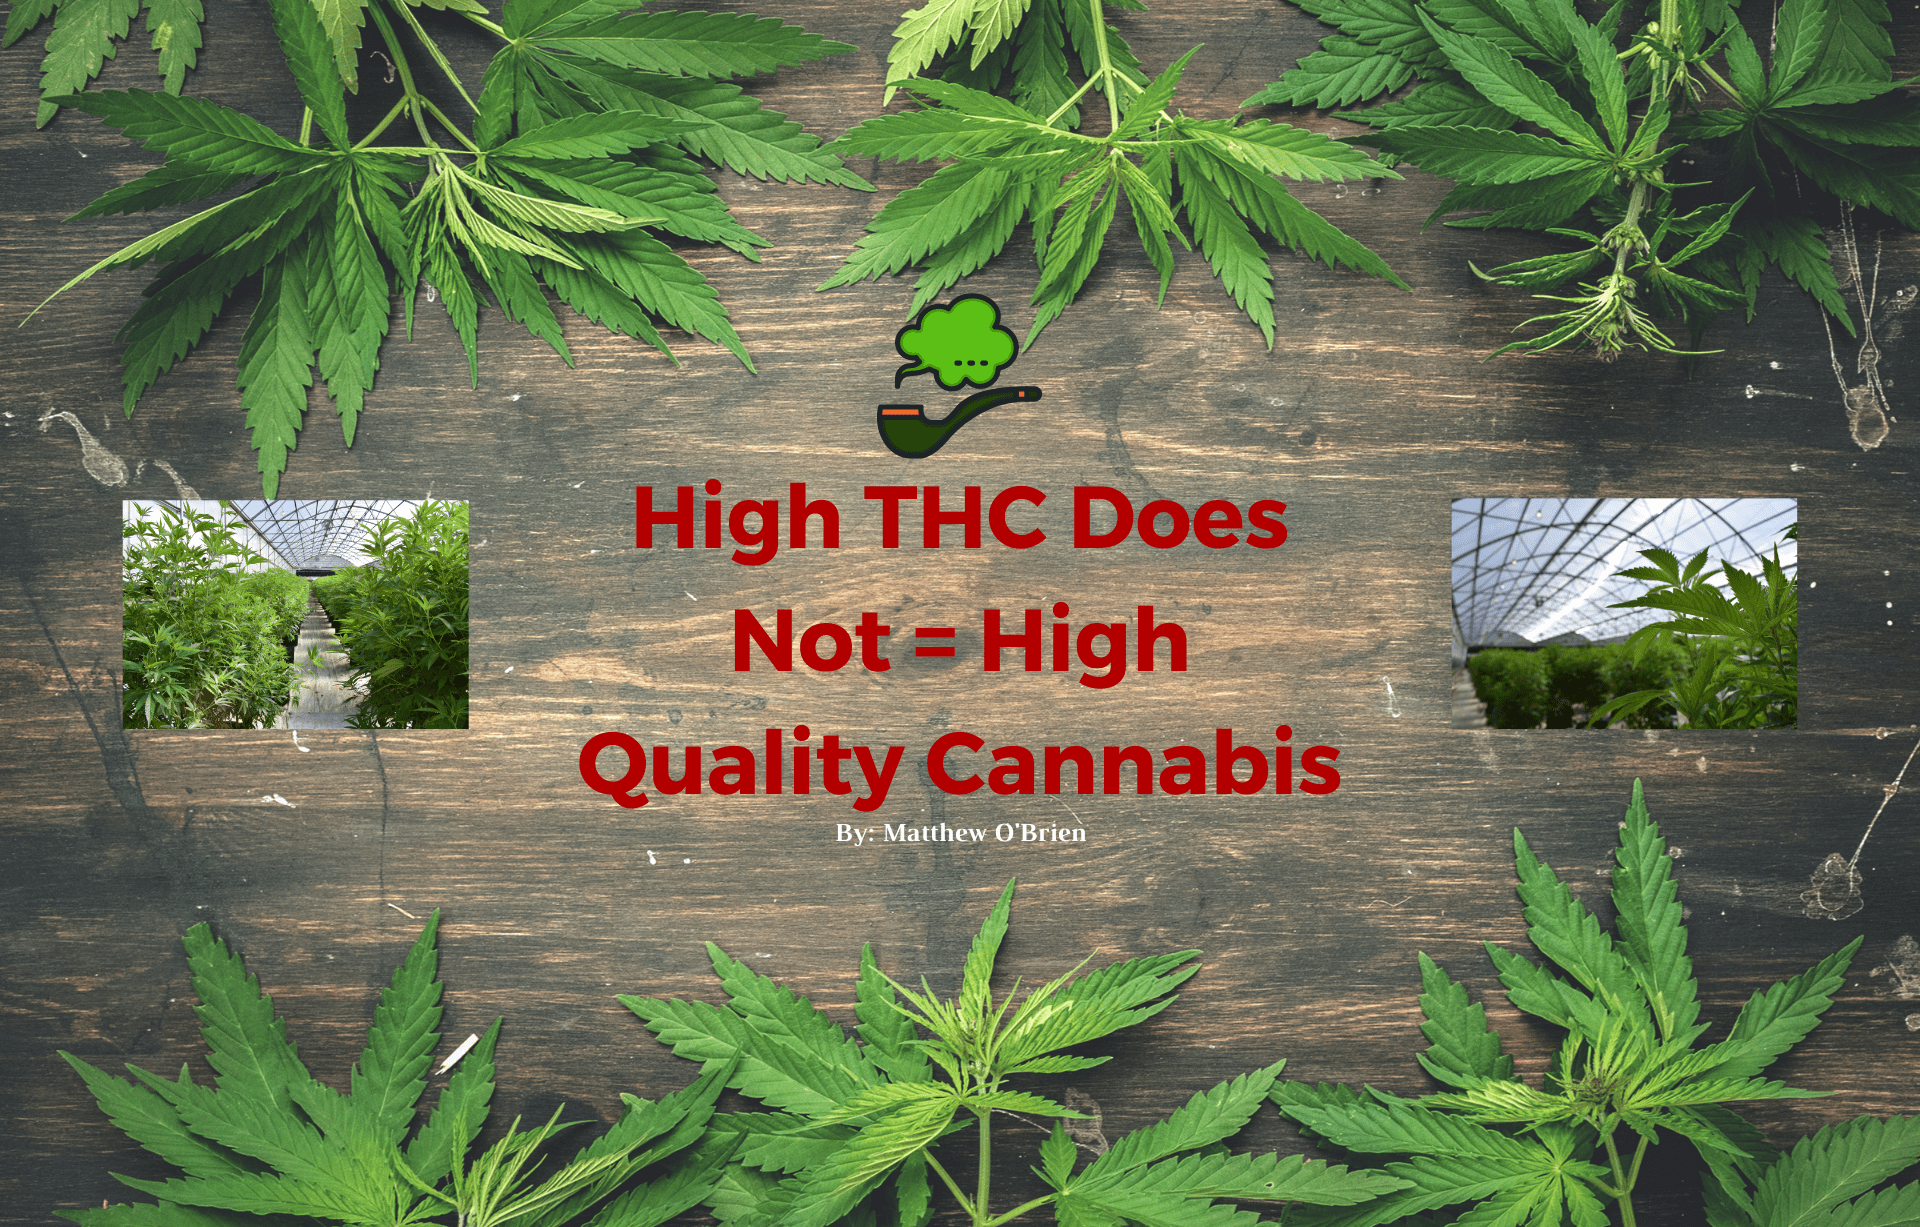 High THC Does Not Equal High Quality Cannabis